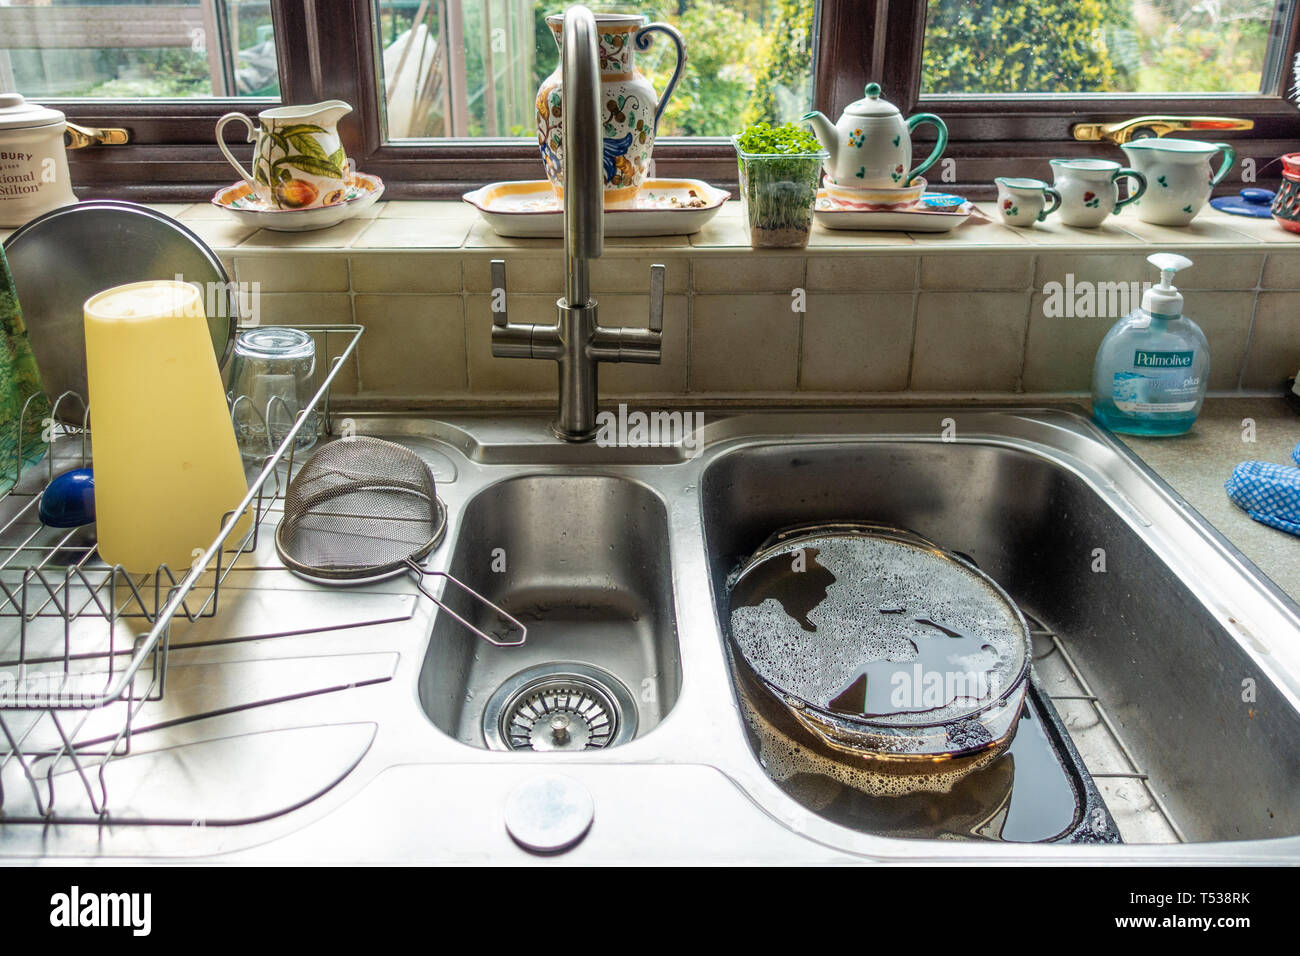 A Stainless Steel Residential Kitchen Sink With A Double